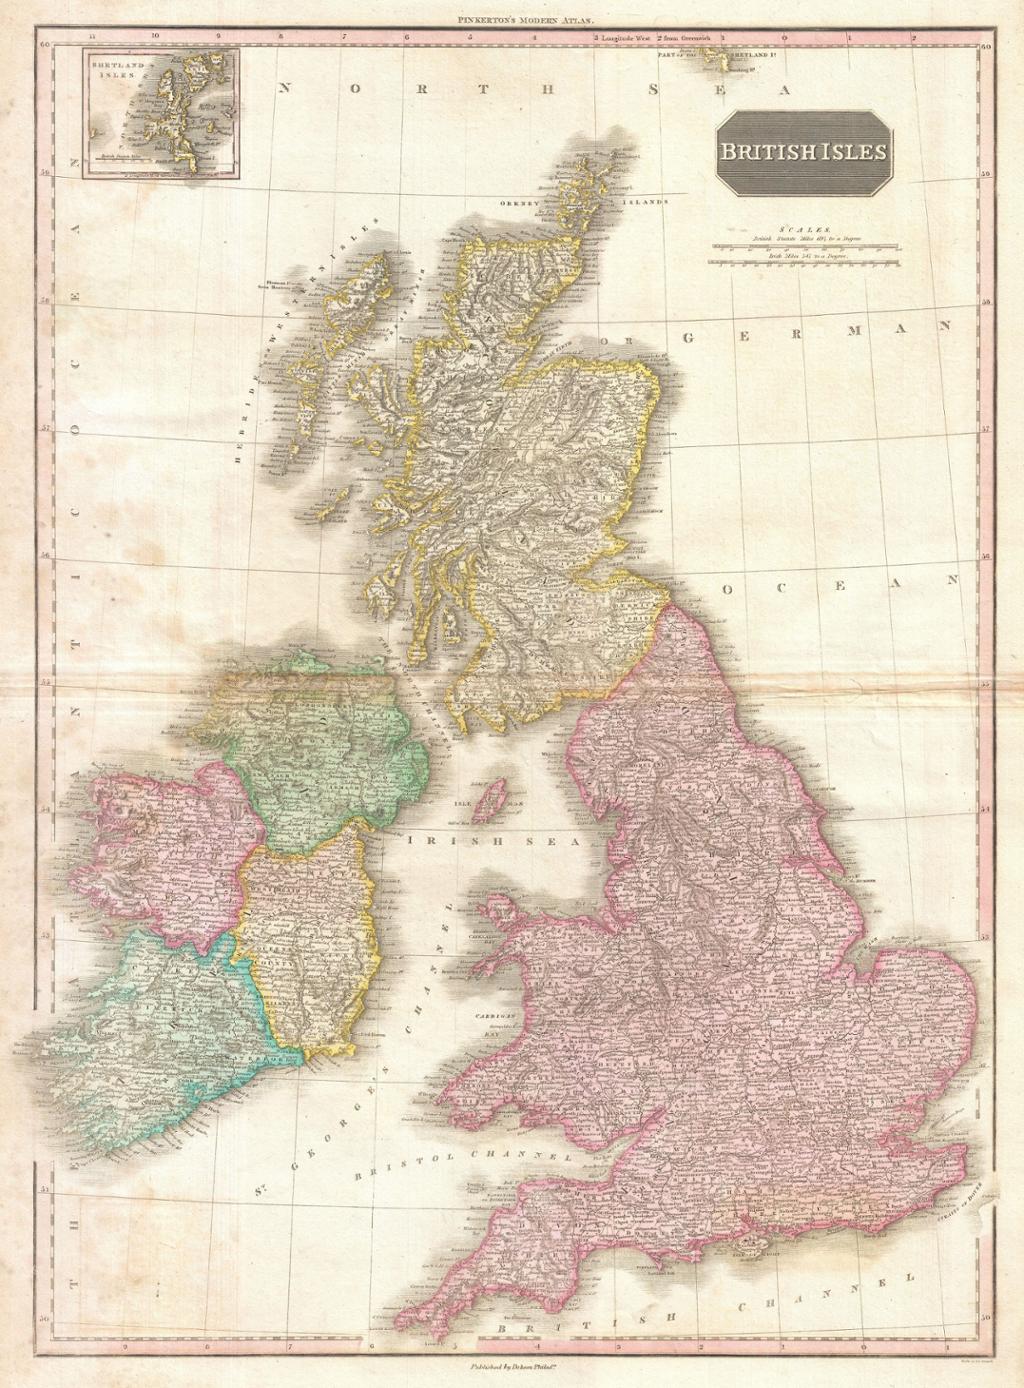 Old, hand-drawn, and very detailed map of the British Isles. It shows Scotland, England, Wales and Ireland, all in different colours.   